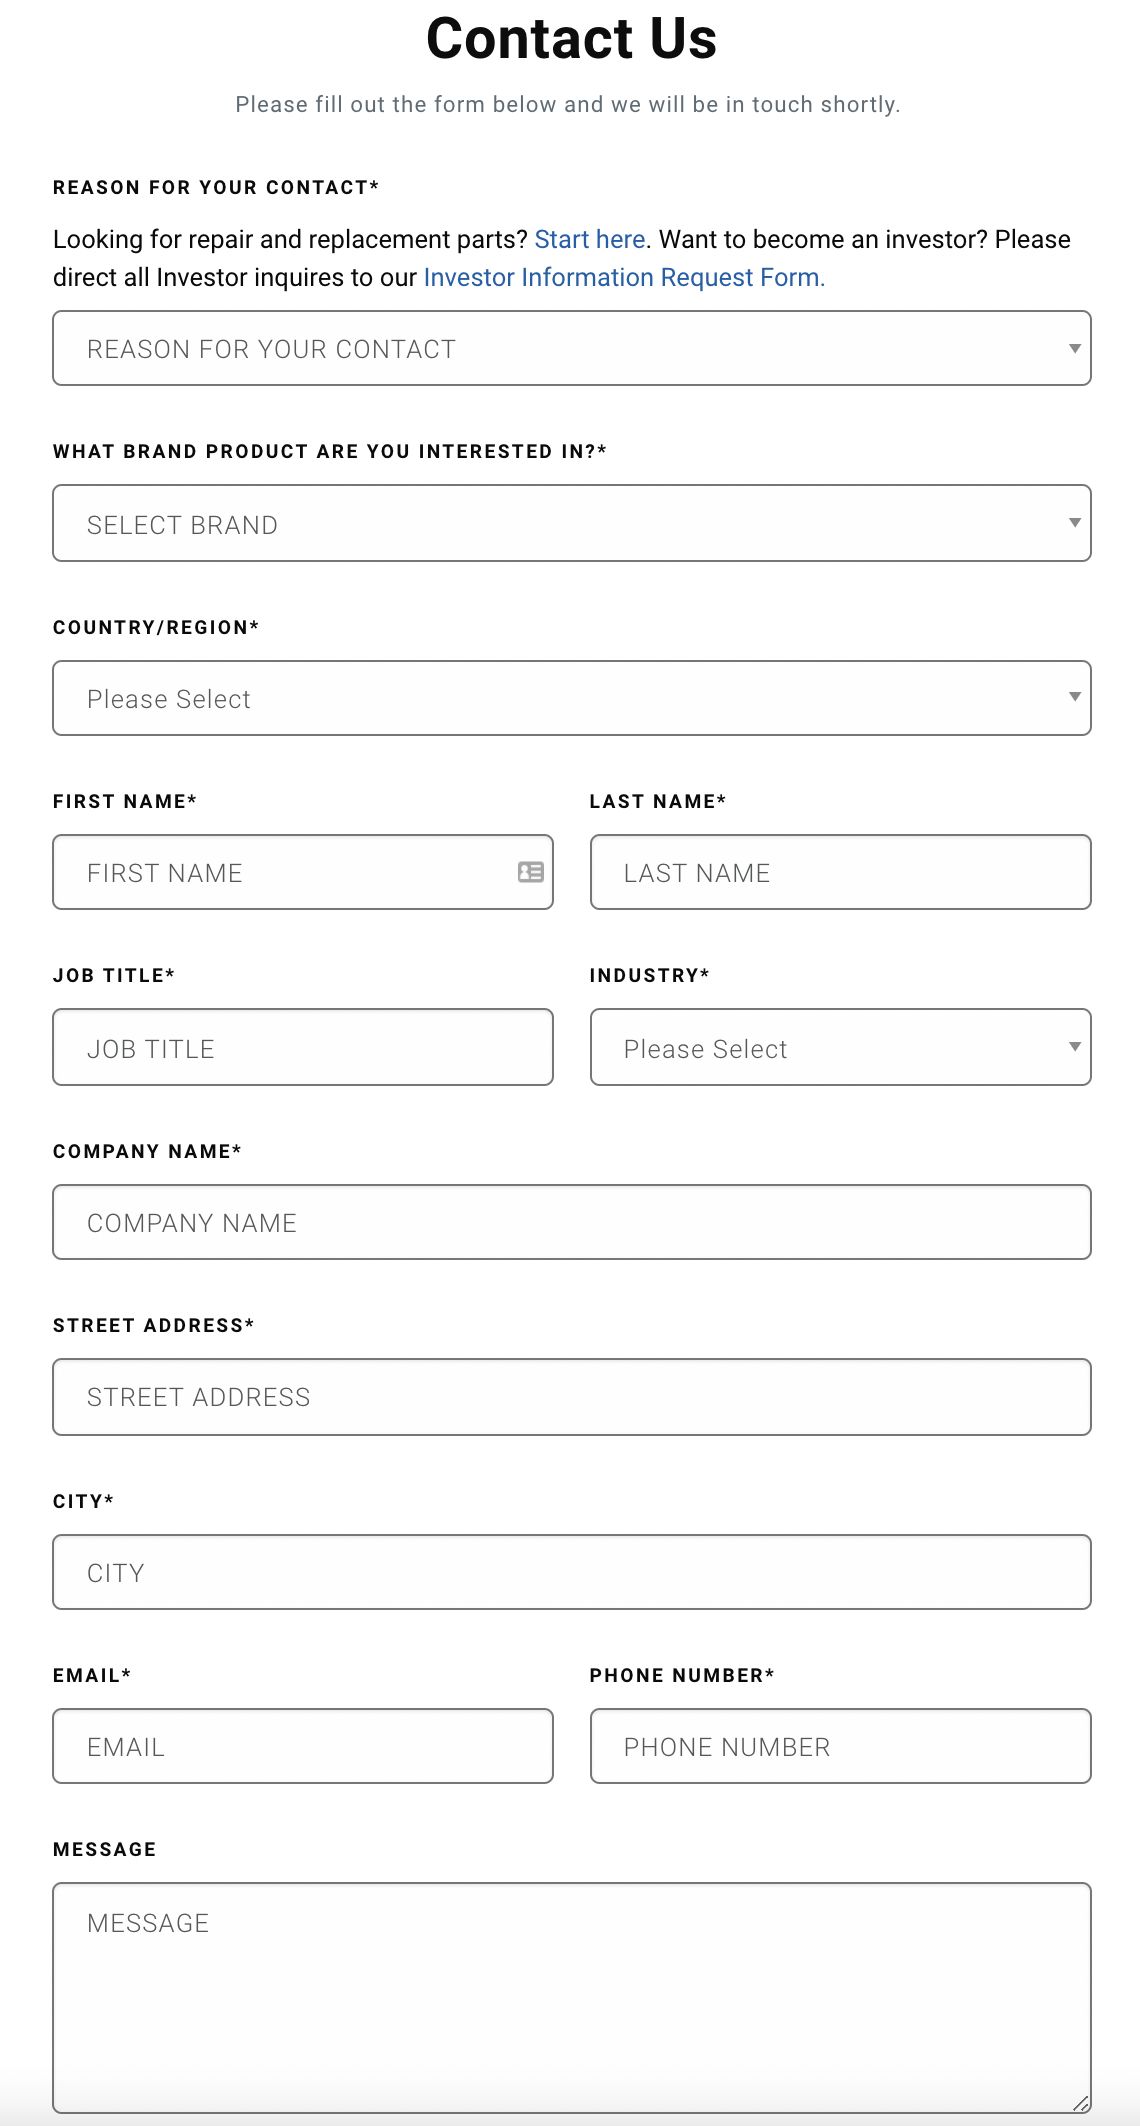 Why your contact page doesn't generate any actual contacts - the worst contact form we've ever made - super long and complex form